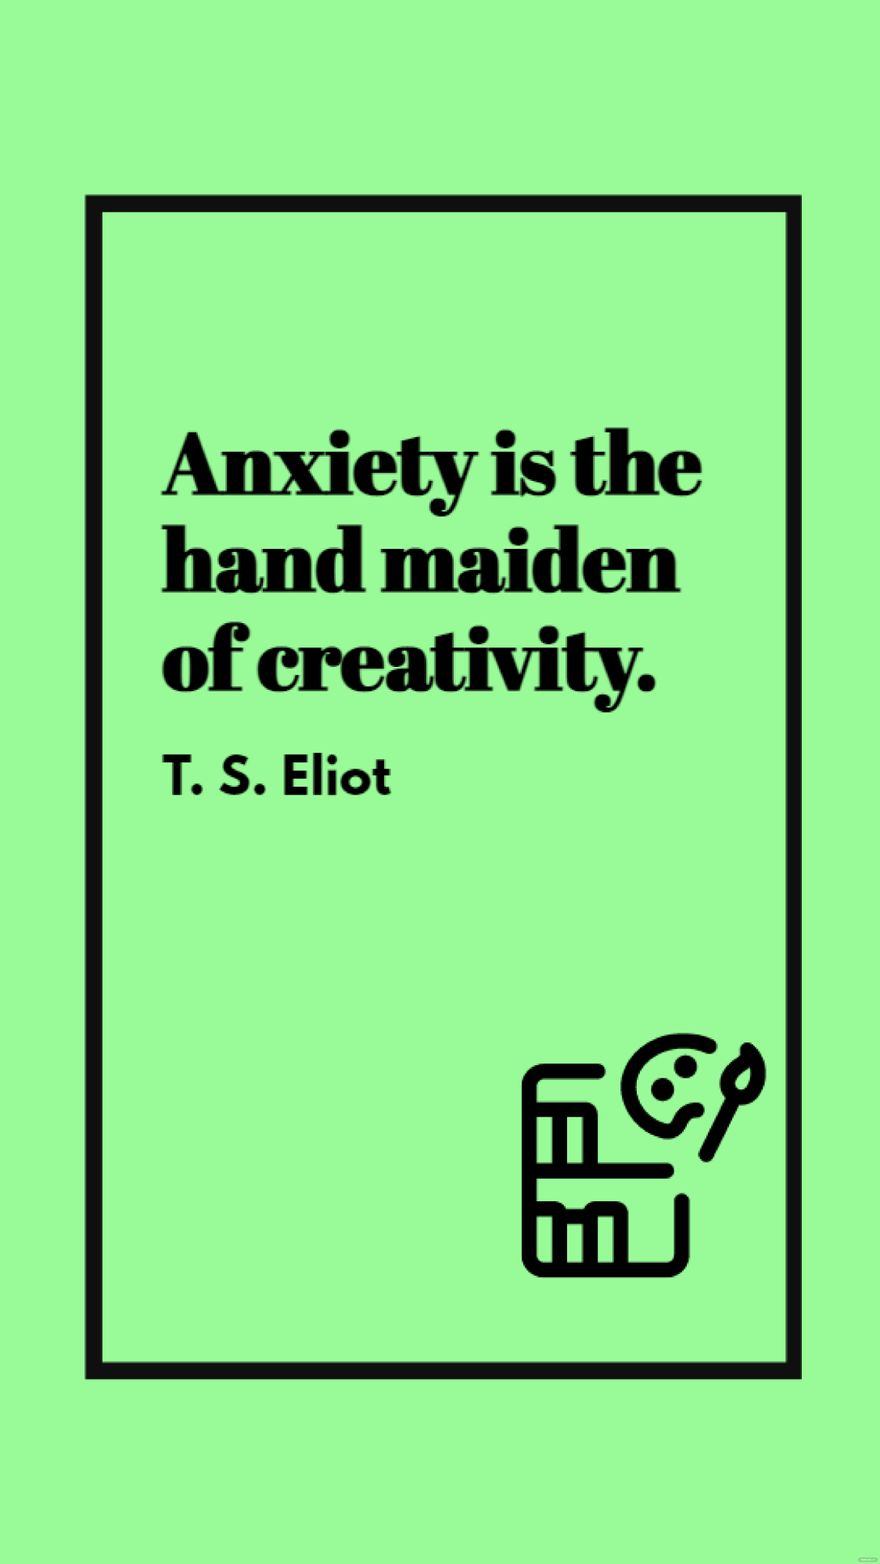 Free T. S. Eliot - Anxiety is the hand maiden of creativity. in JPG